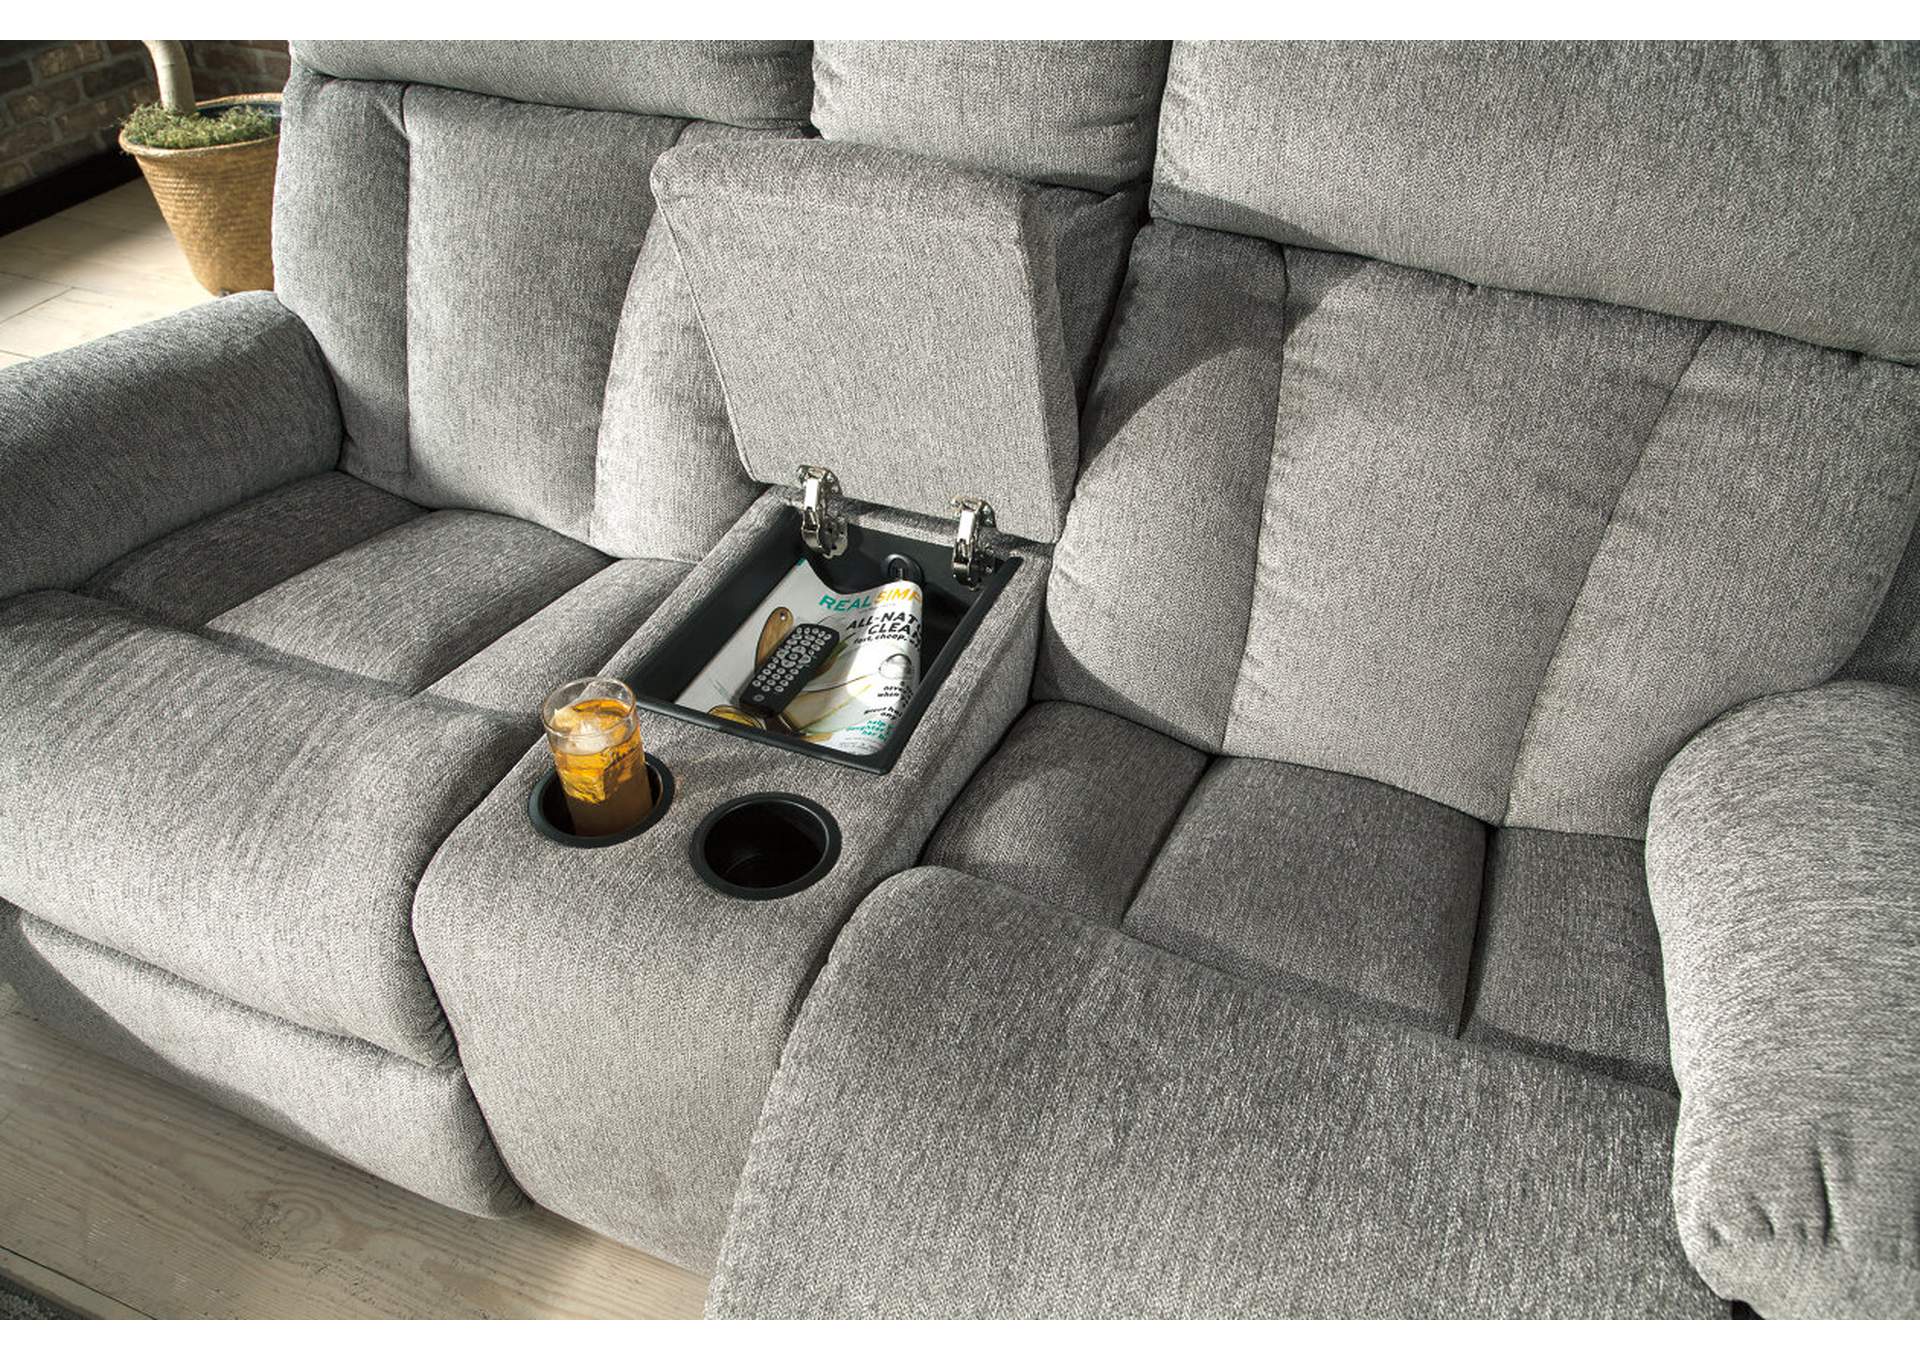 Mitchiner Reclining Loveseat and Recliner,Signature Design By Ashley